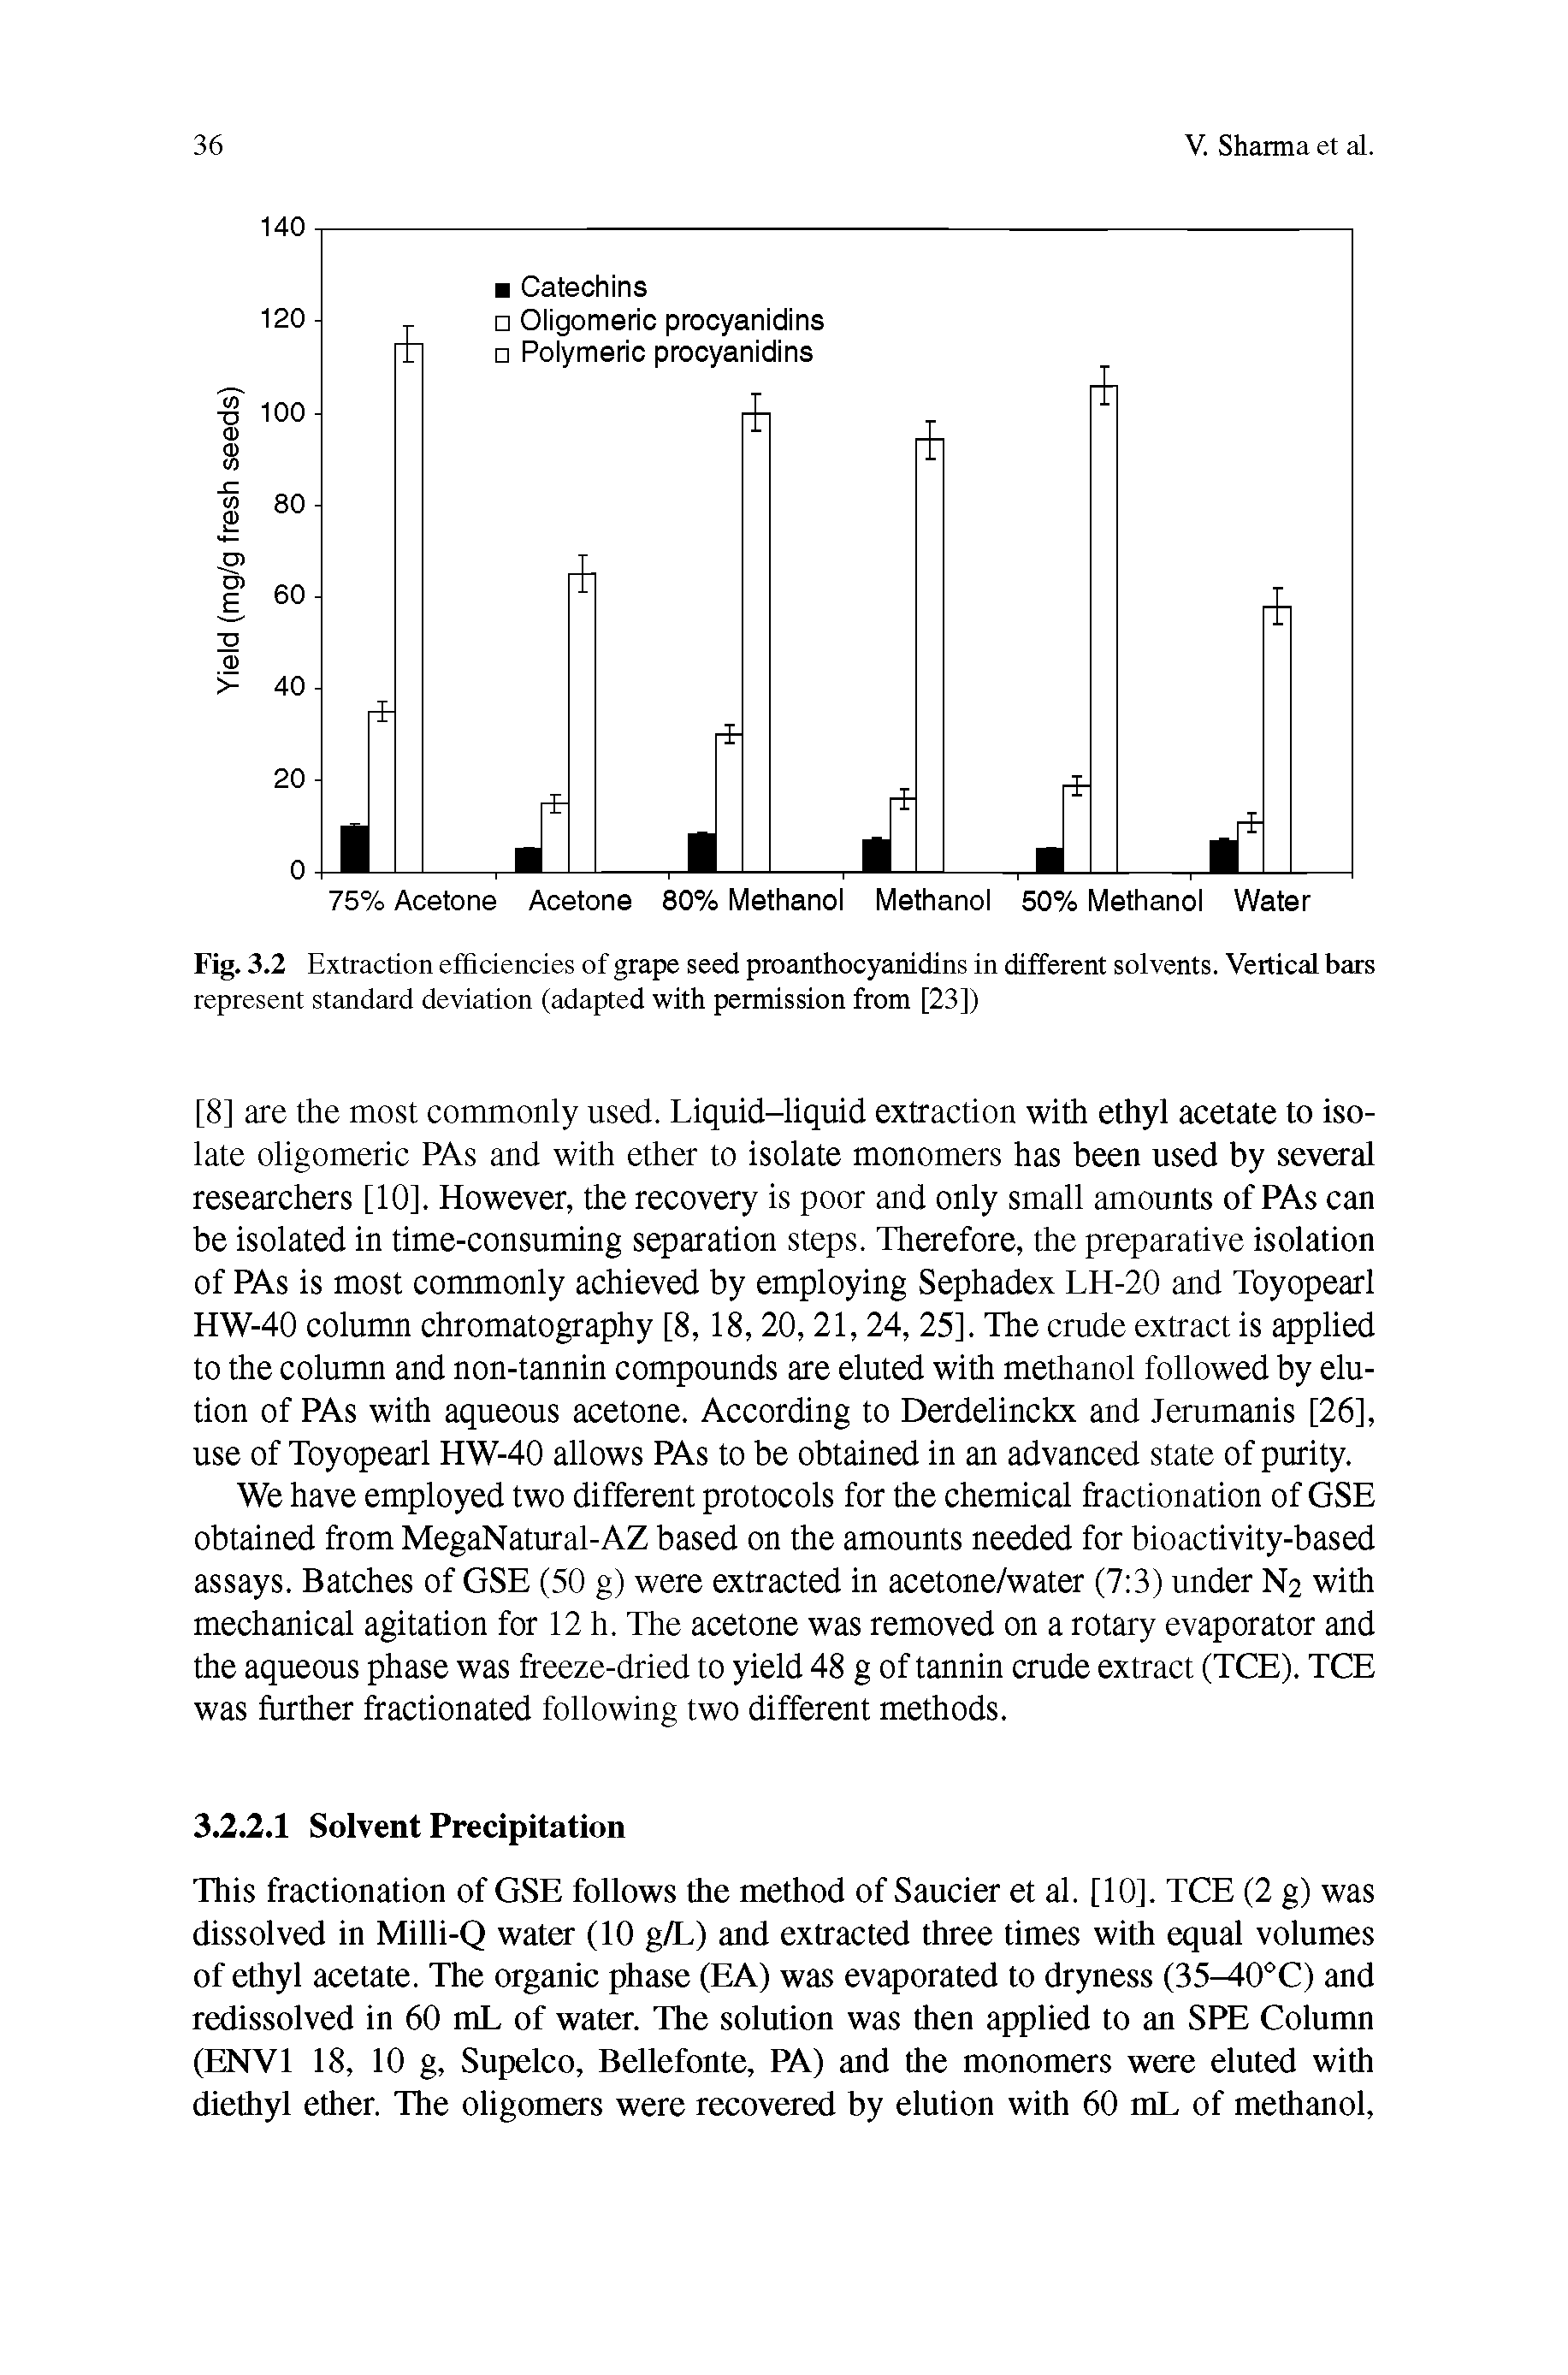 Fig. 3.2 Extraction efficiencies of grape seed proanthocyanidins in different solvents. Vertical bars represent standard deviation (adapted with permission from [23])...